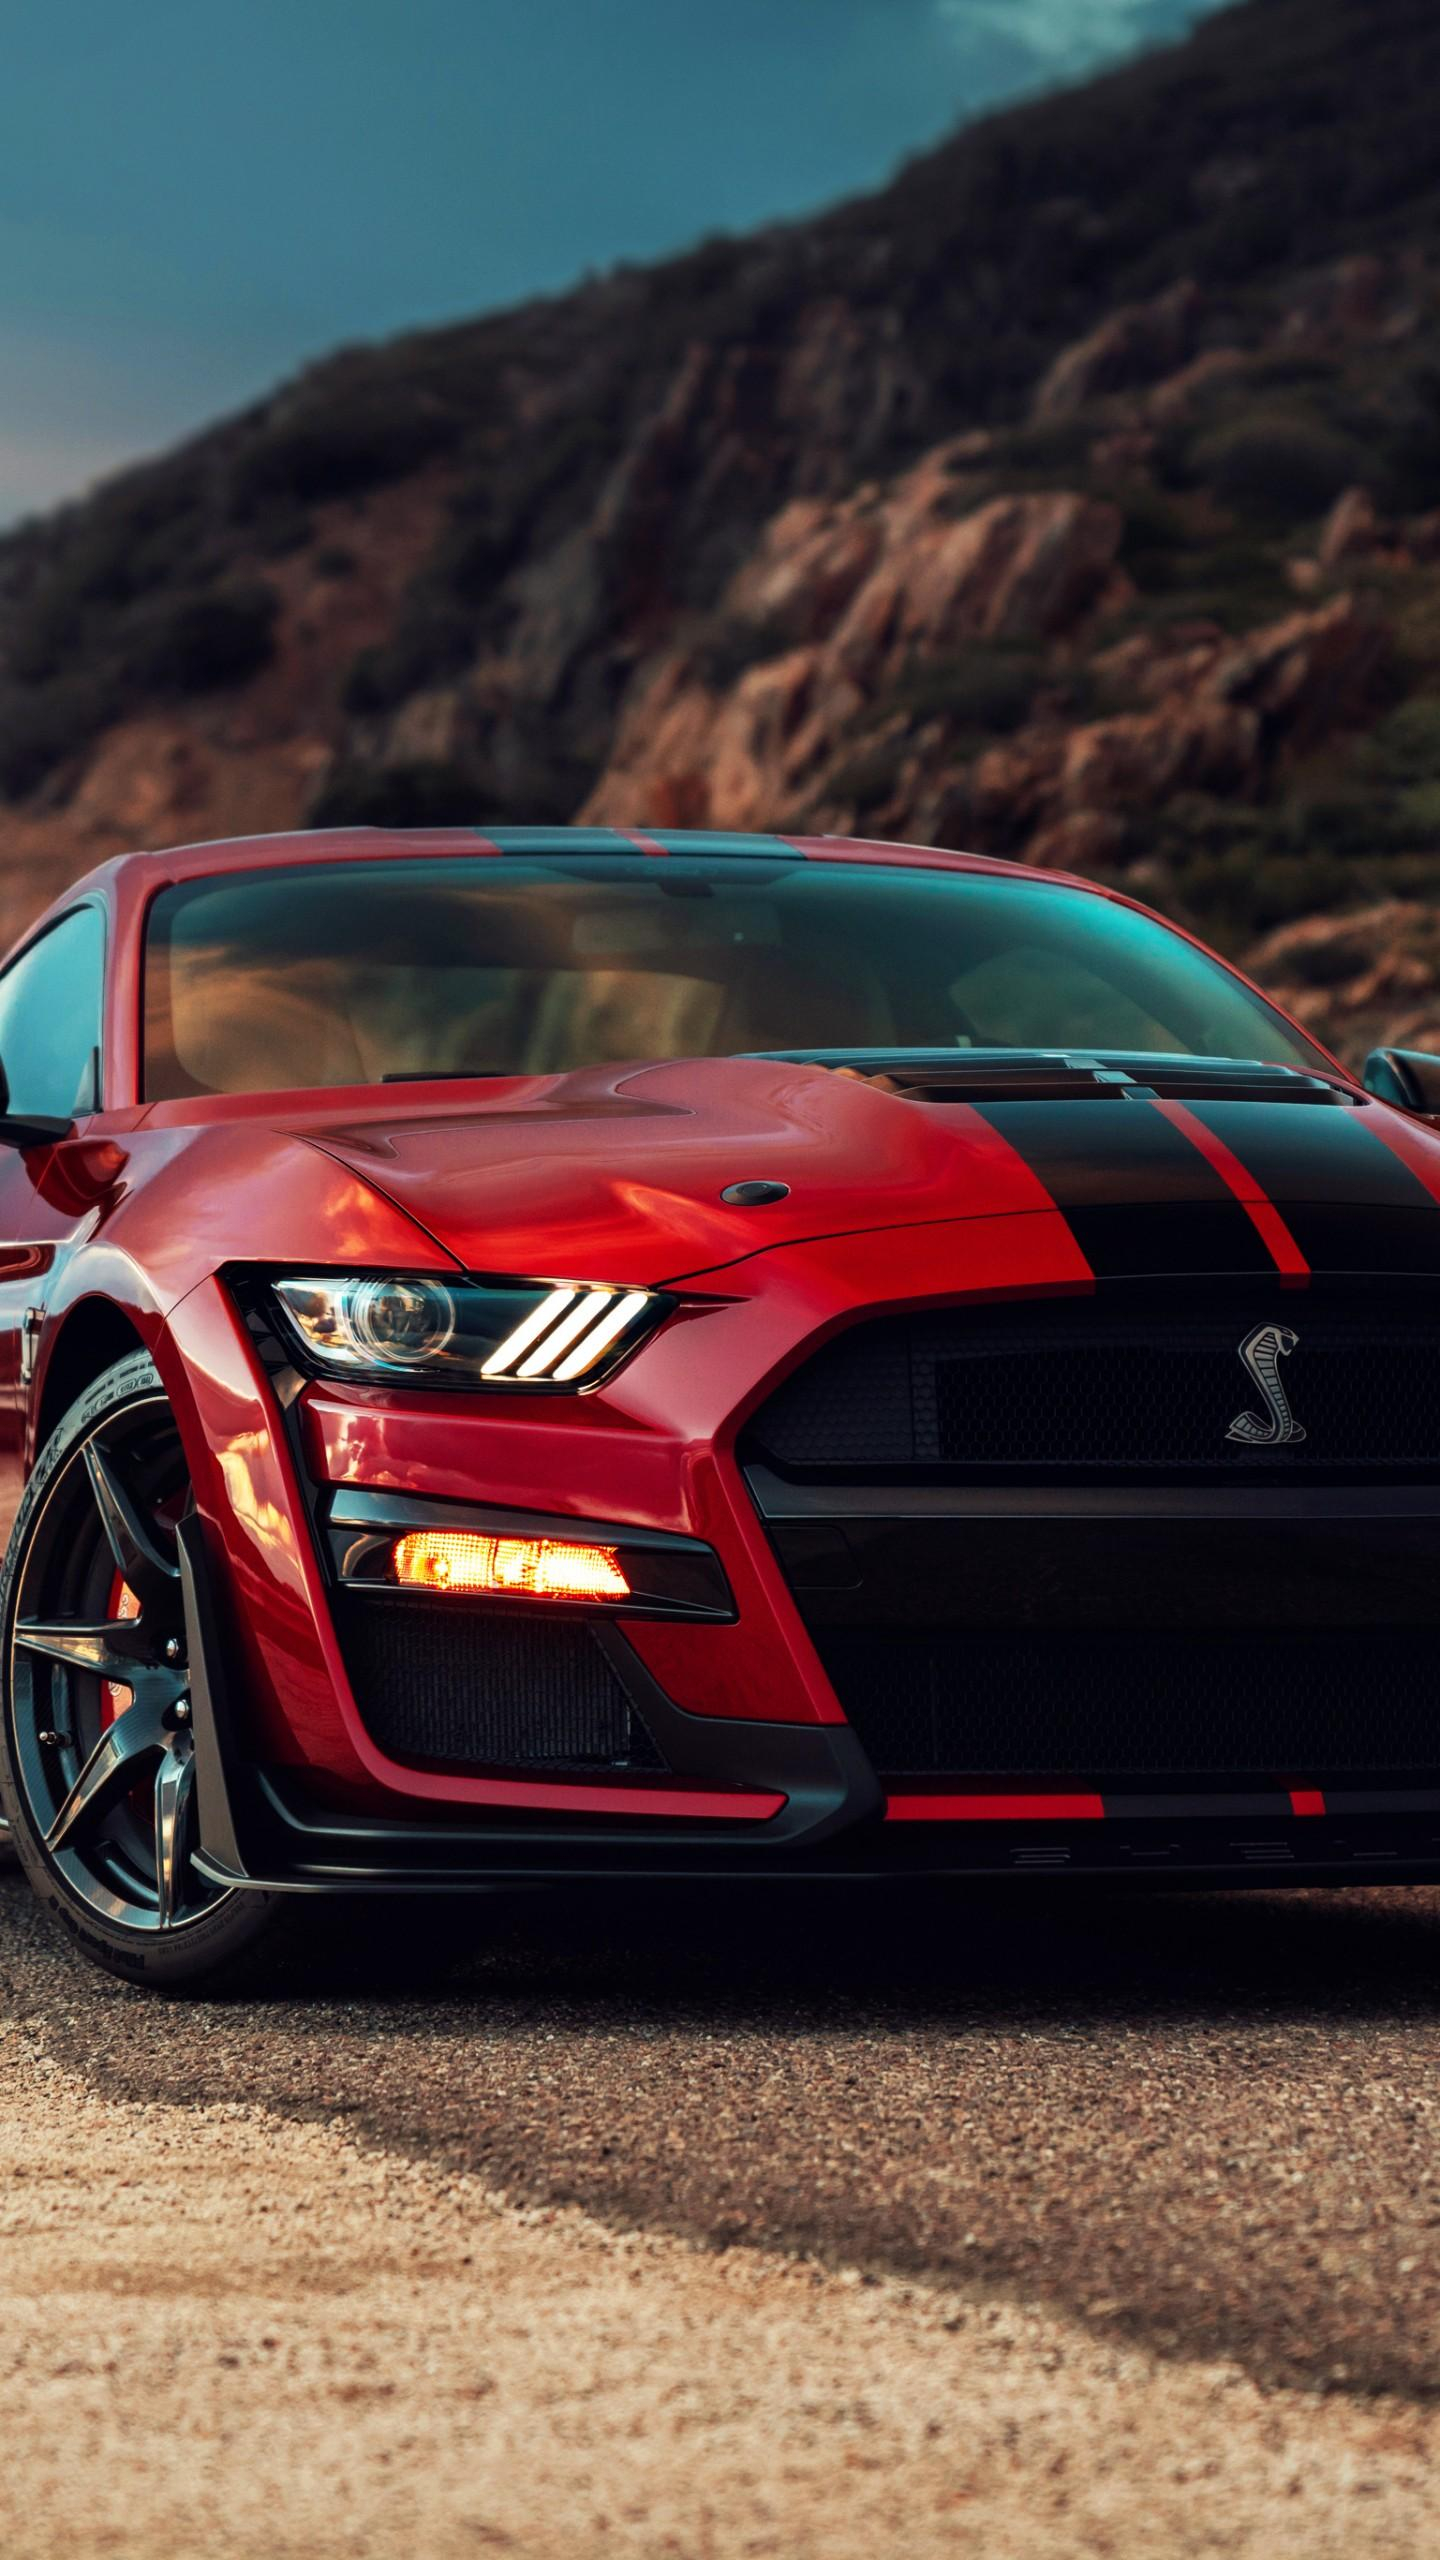 1440x2560 Ford Mustang Shelby Gt500 Wallpapers